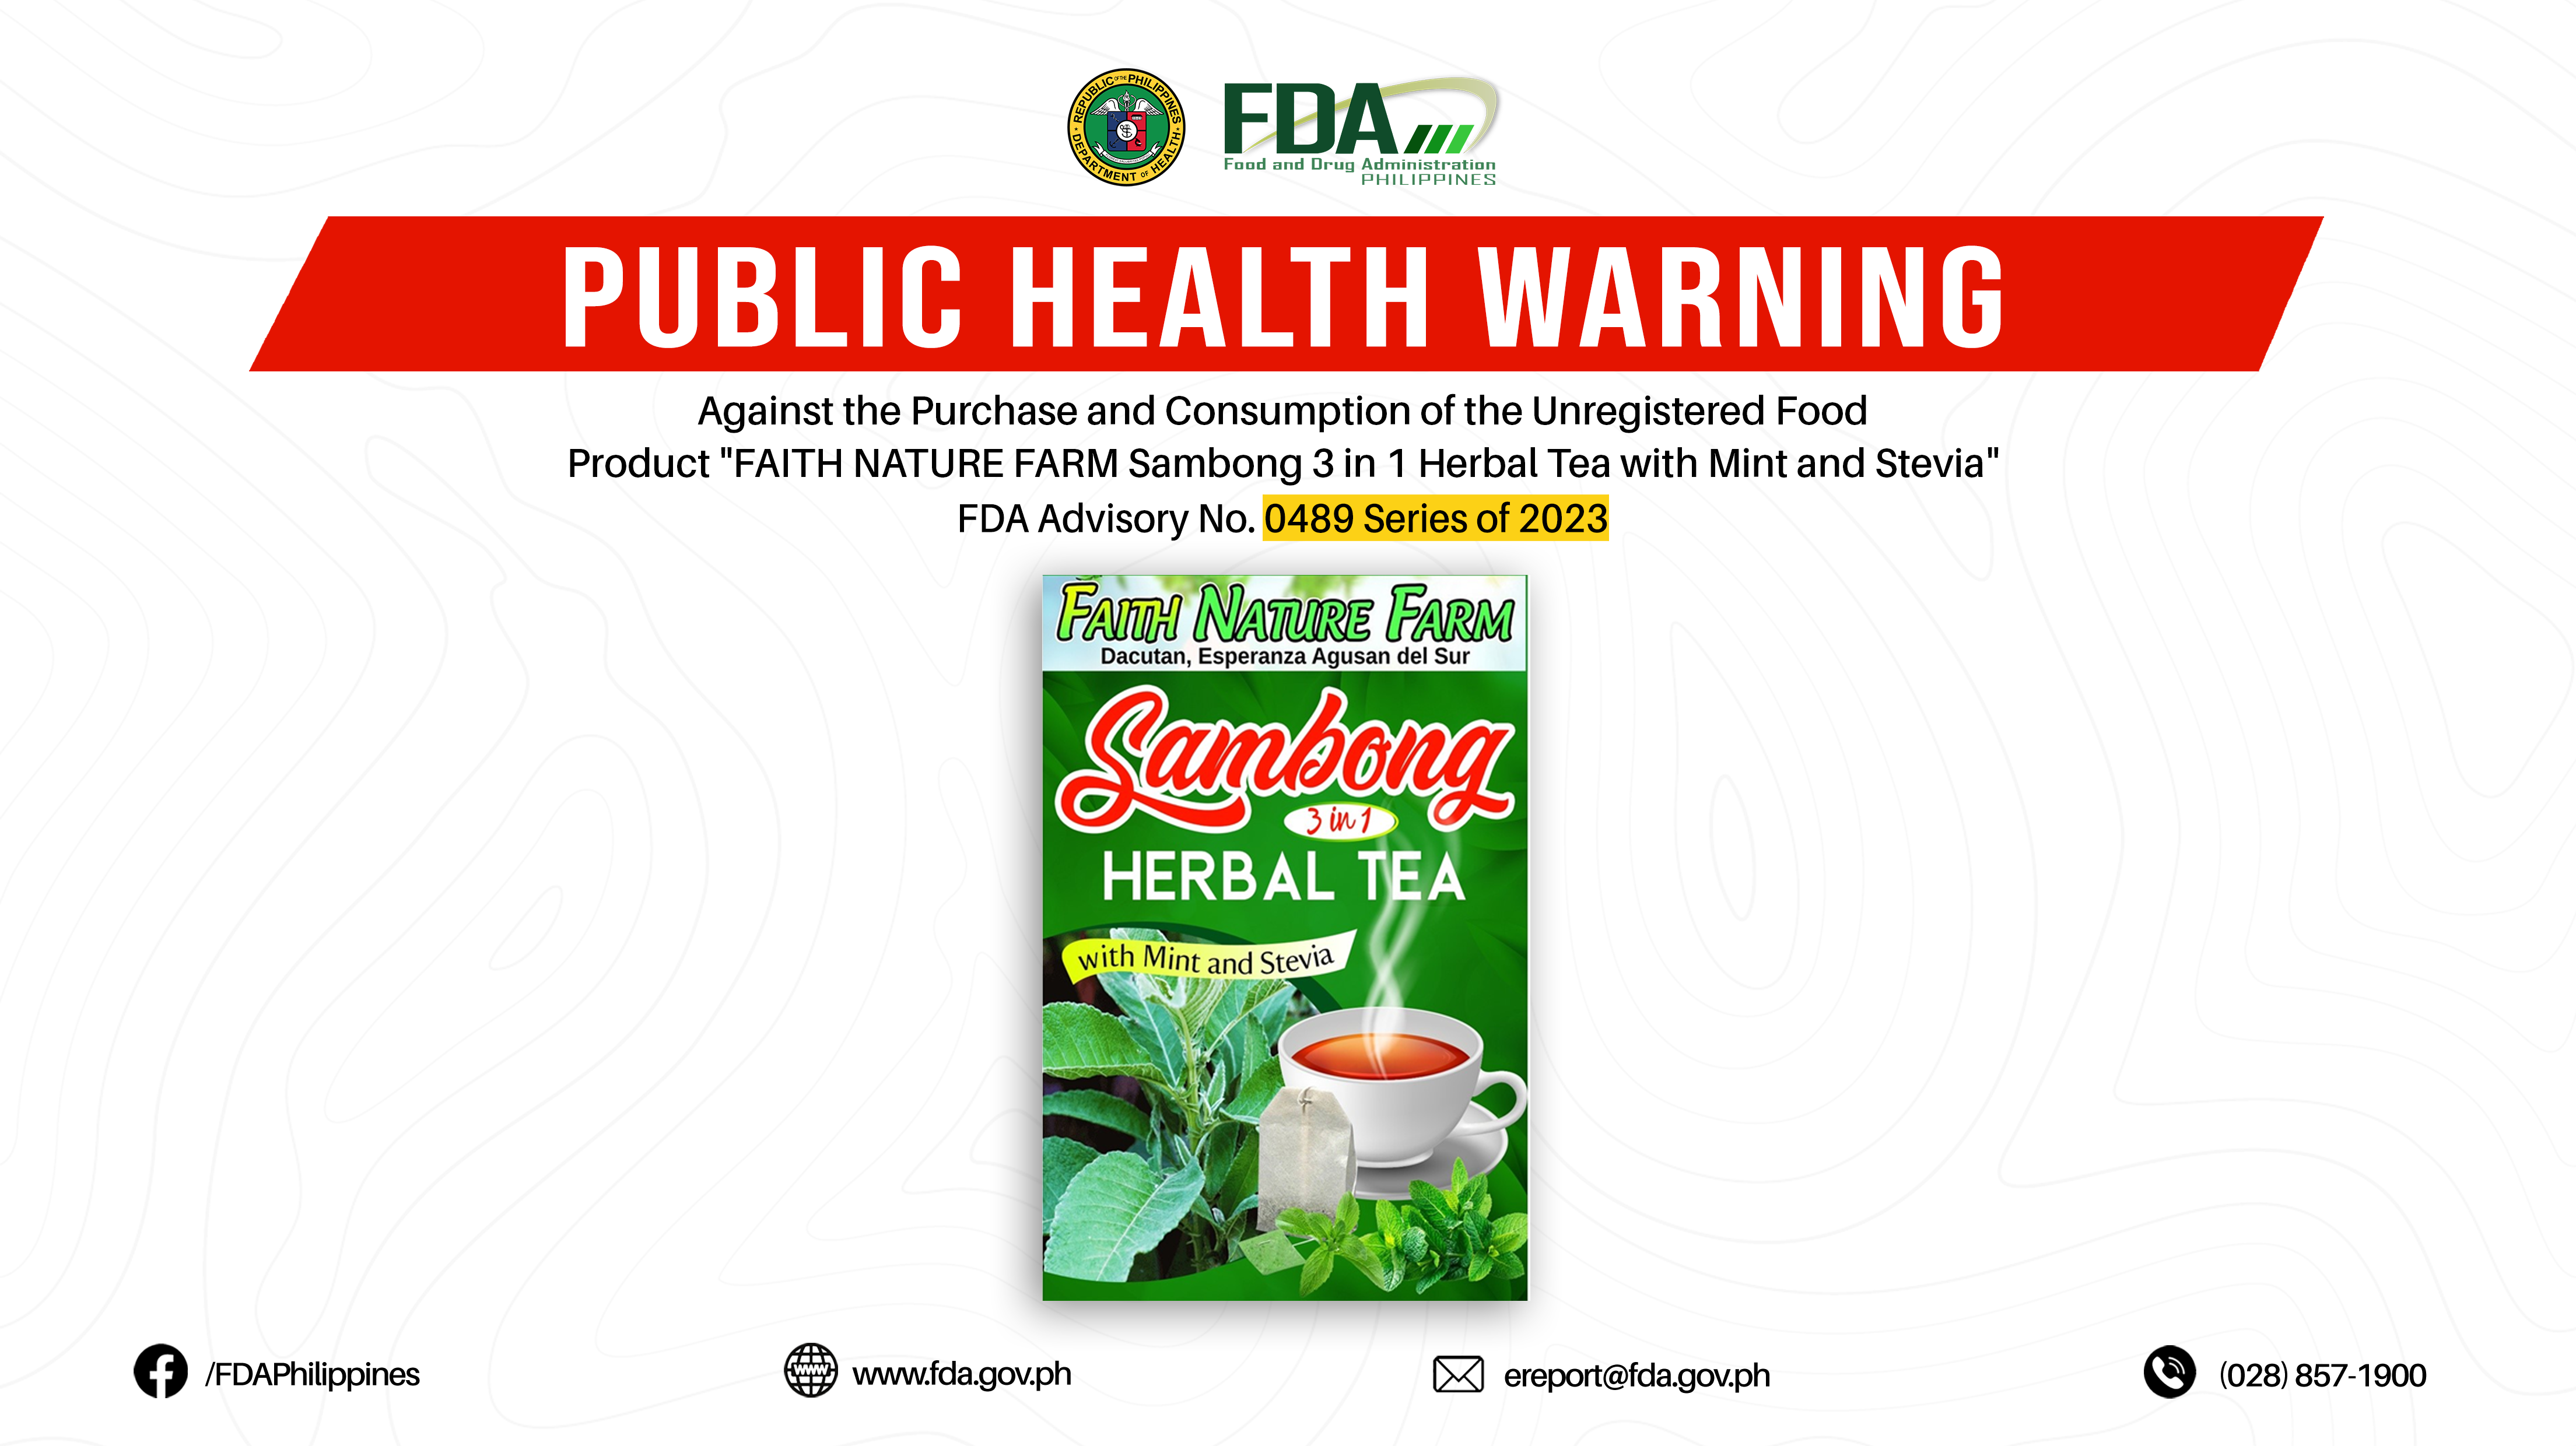 FDA Advisory No.2023-0489 ||  Public Health Warning Against the Purchase and Consumption of the Unregistered Food Product “FAITH NATURE FARM Sambong 3 in 1 Herbal Tea with Mint and Stevia”